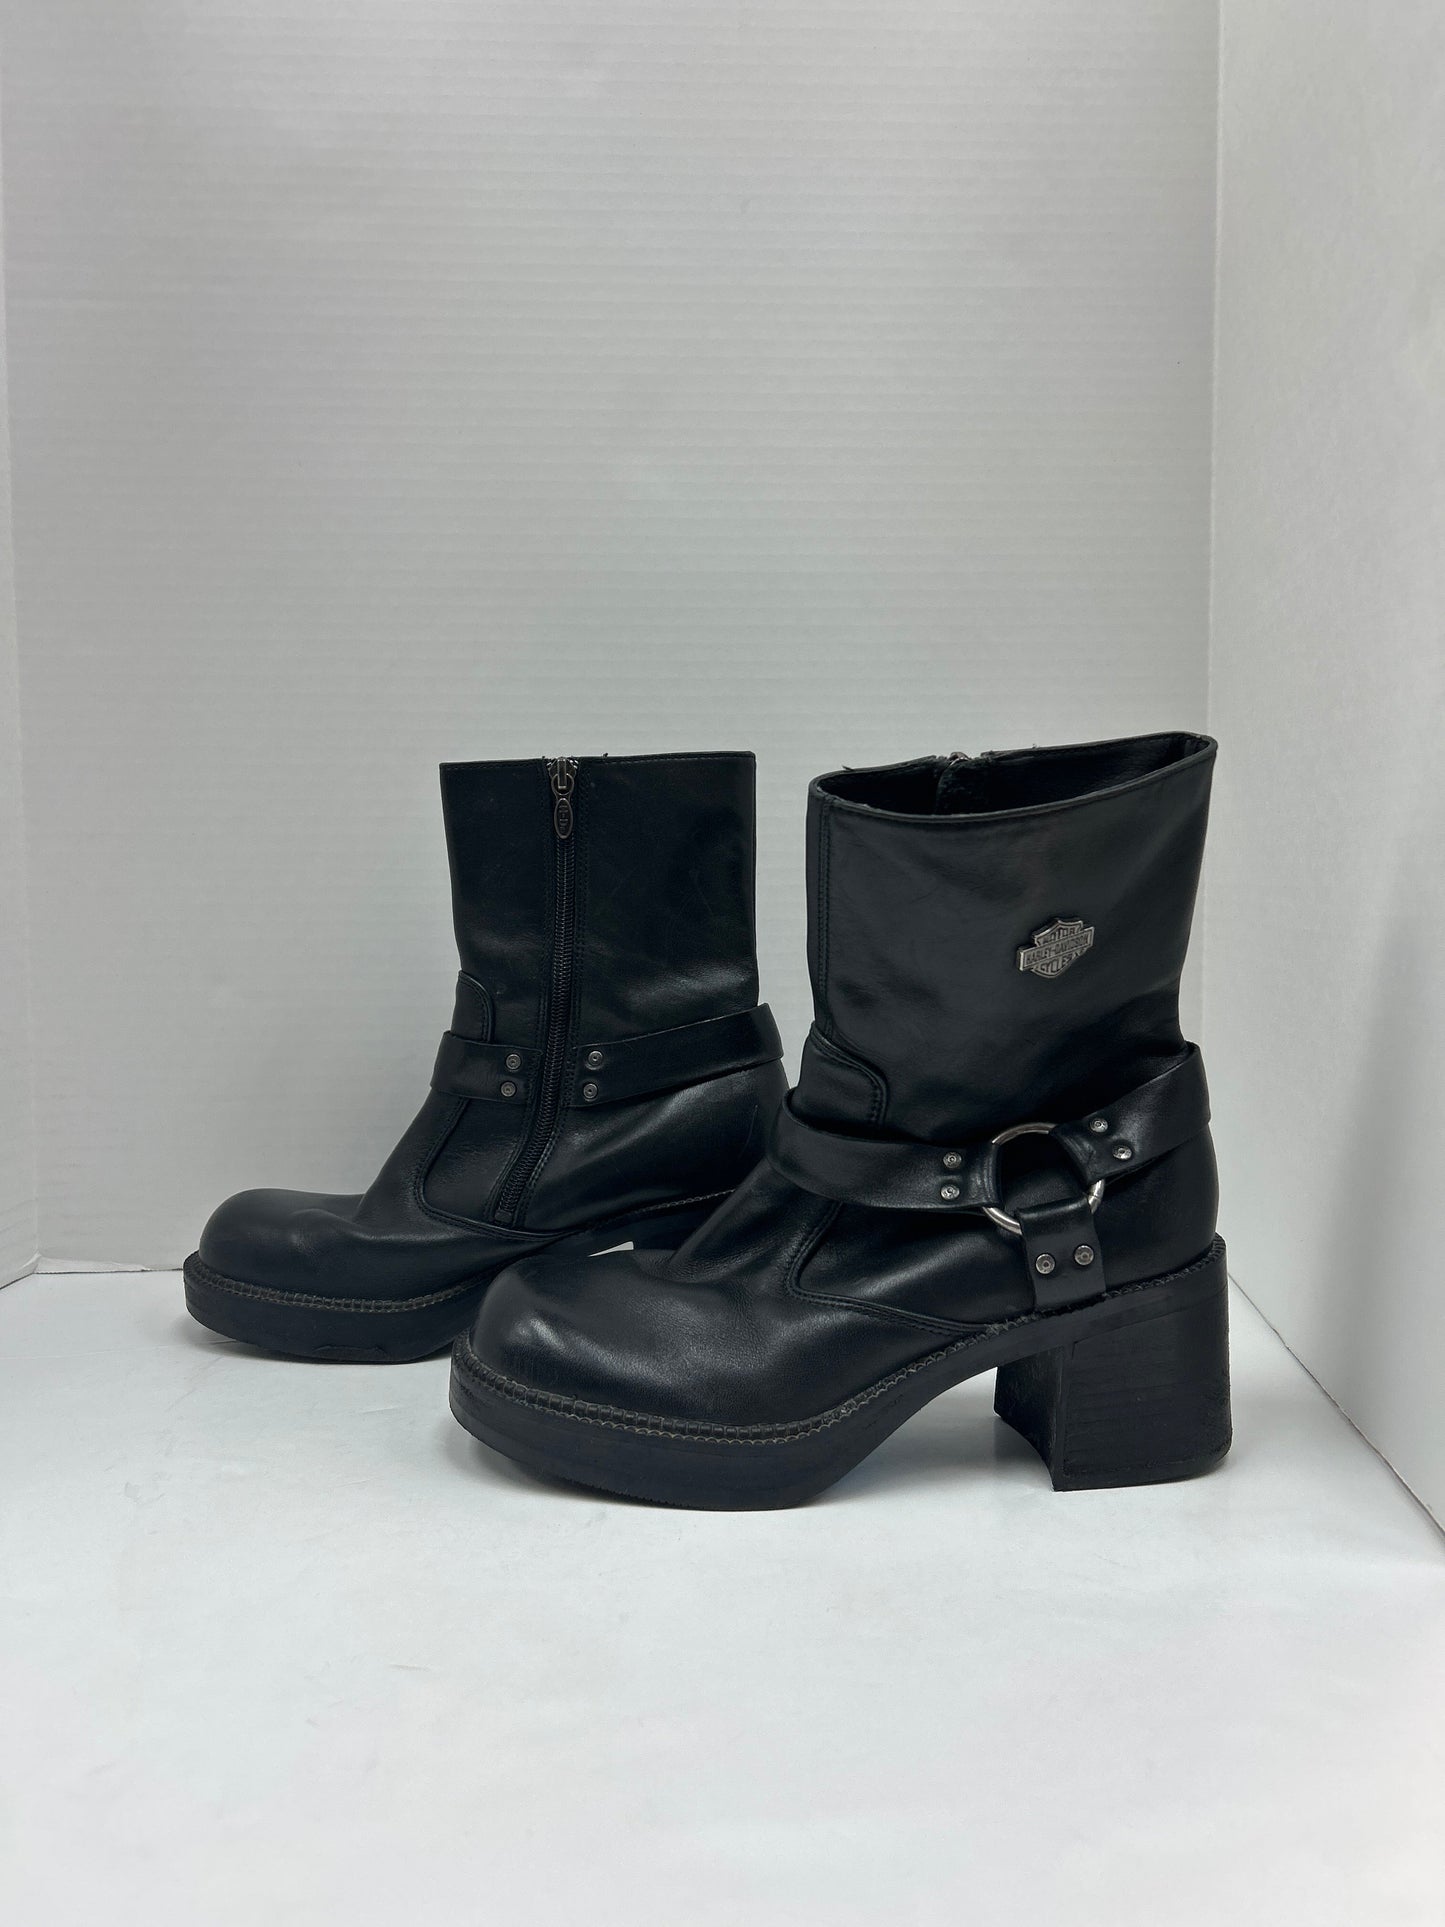 Boots Ankle Heels By Harley Davidson  Size: 8